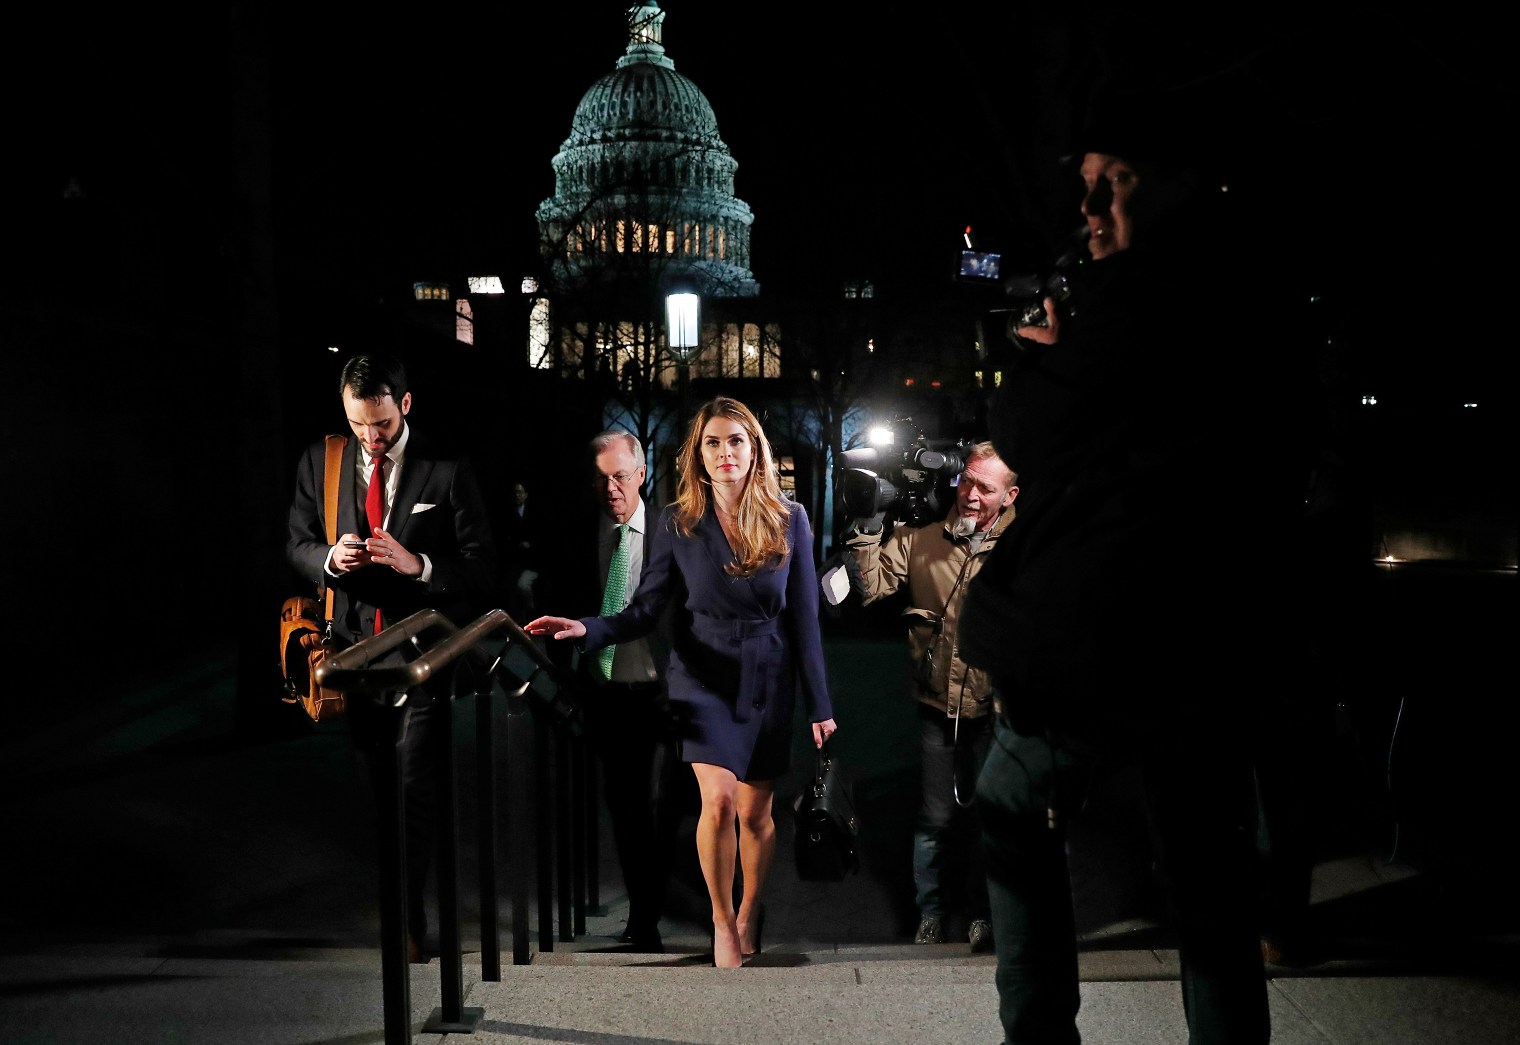 Hope Hicks, the White House communications director, leaves the Capitol on Feb. 27